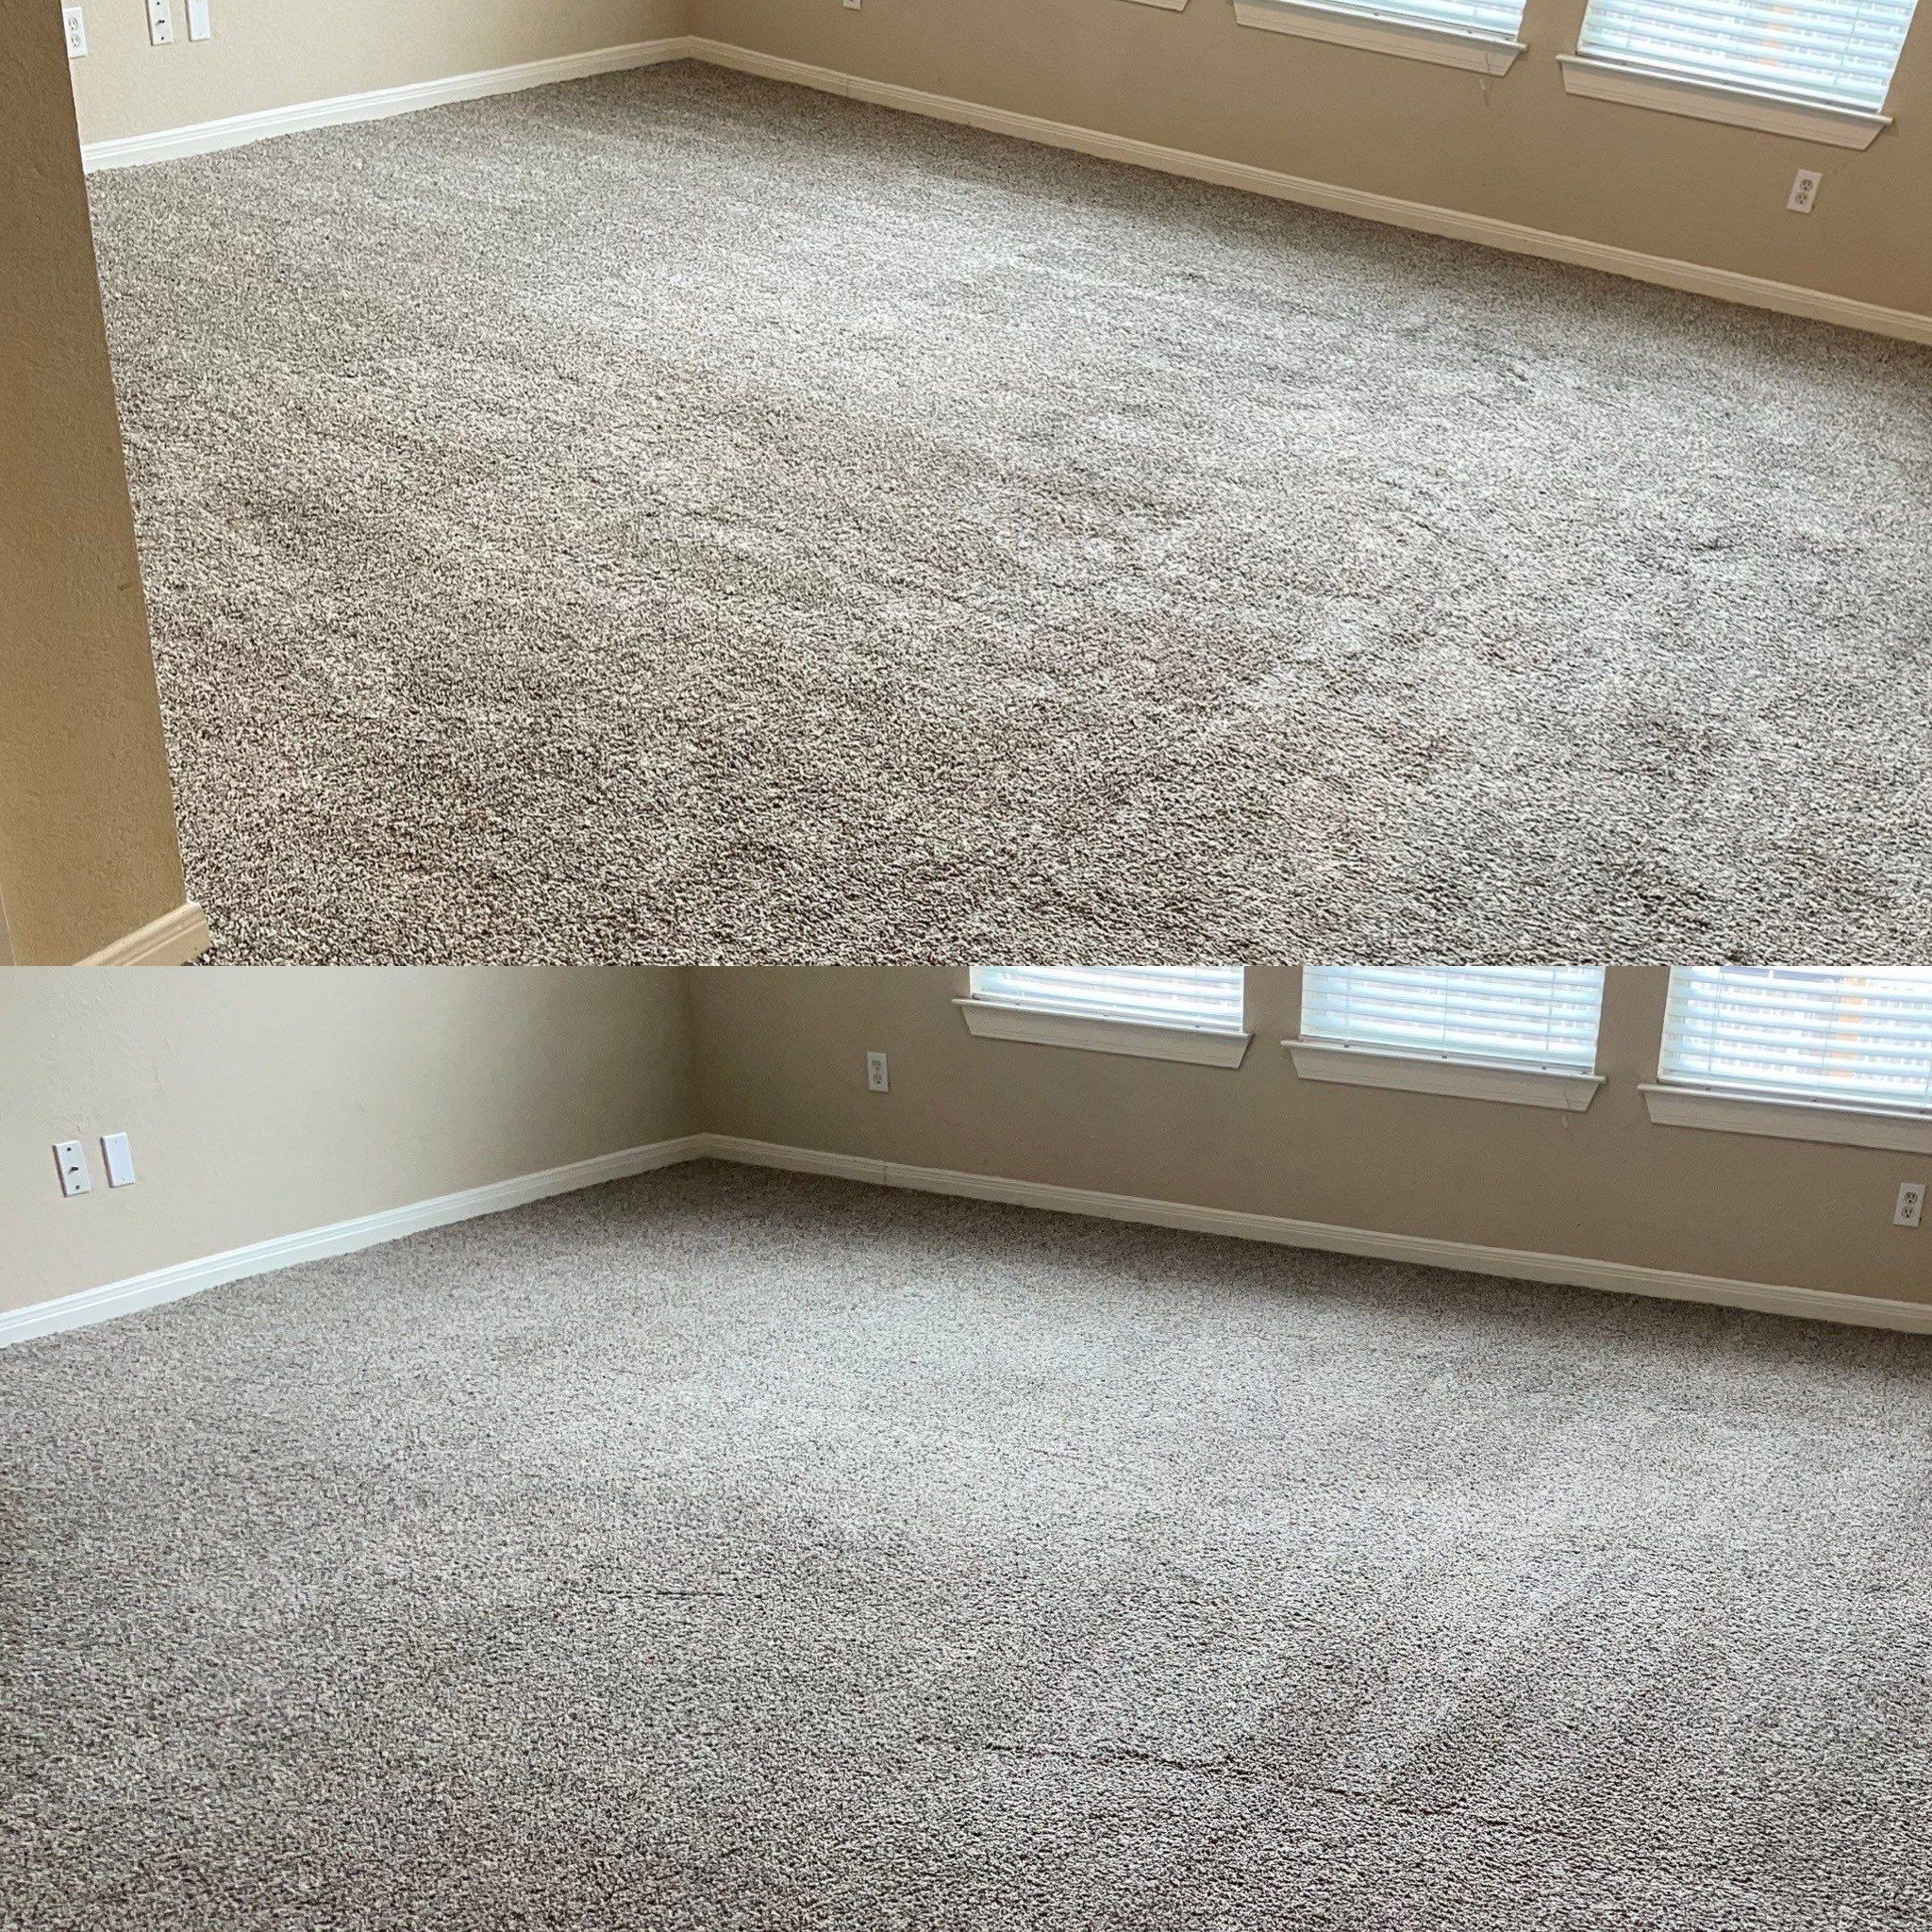 the carpet cleaning service in san antonio cleaned and rejuvenated the carpet making it look significantly fresher and cleaner